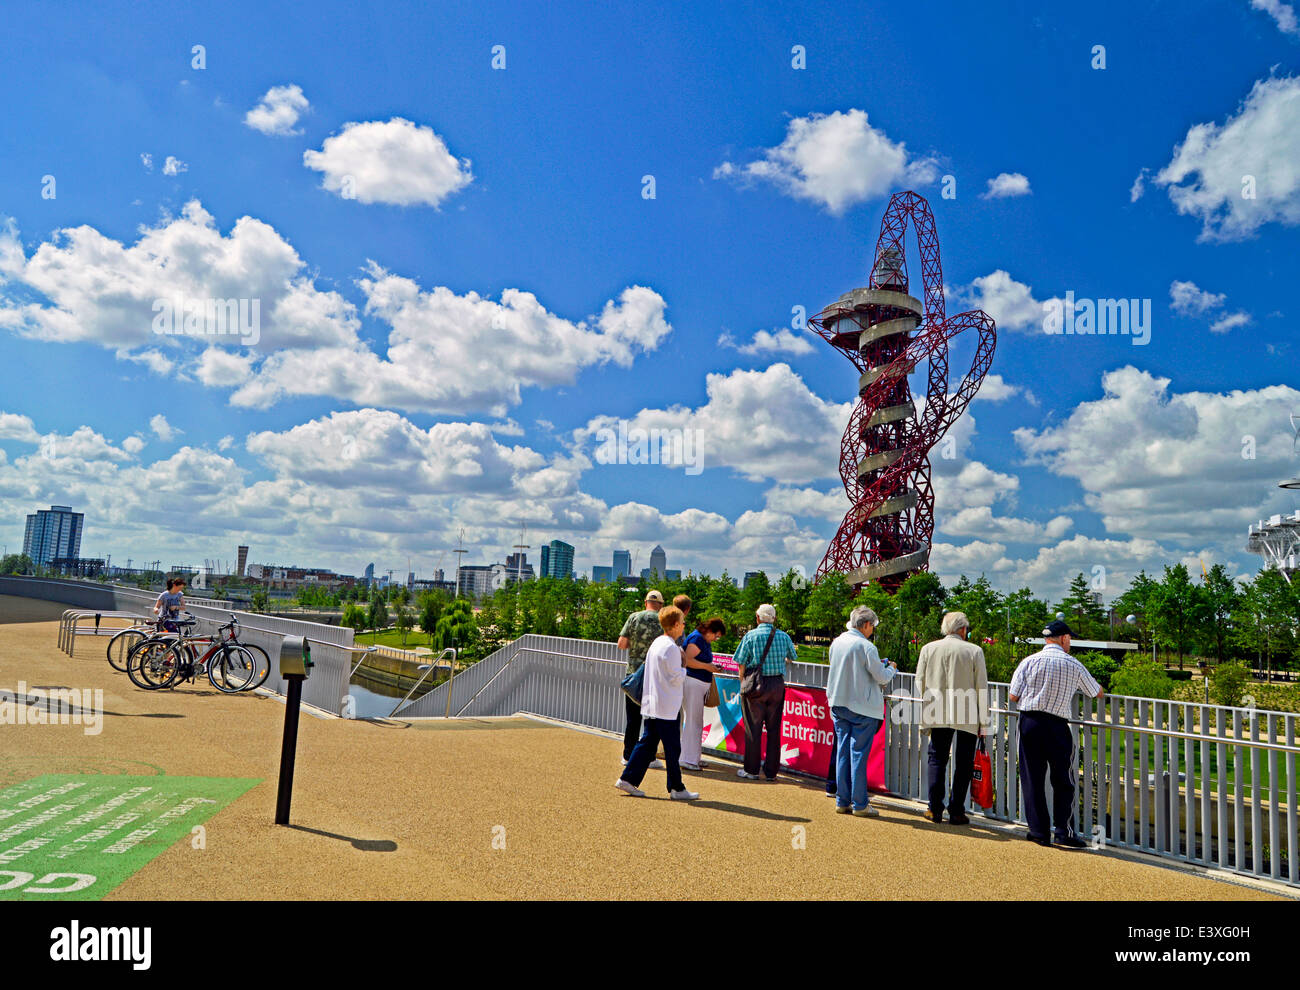 View of the ArcelorMittal Orbit at the Queen Elizabeth Olympic Park, Stratford, London, England, United Kingdom Stock Photo